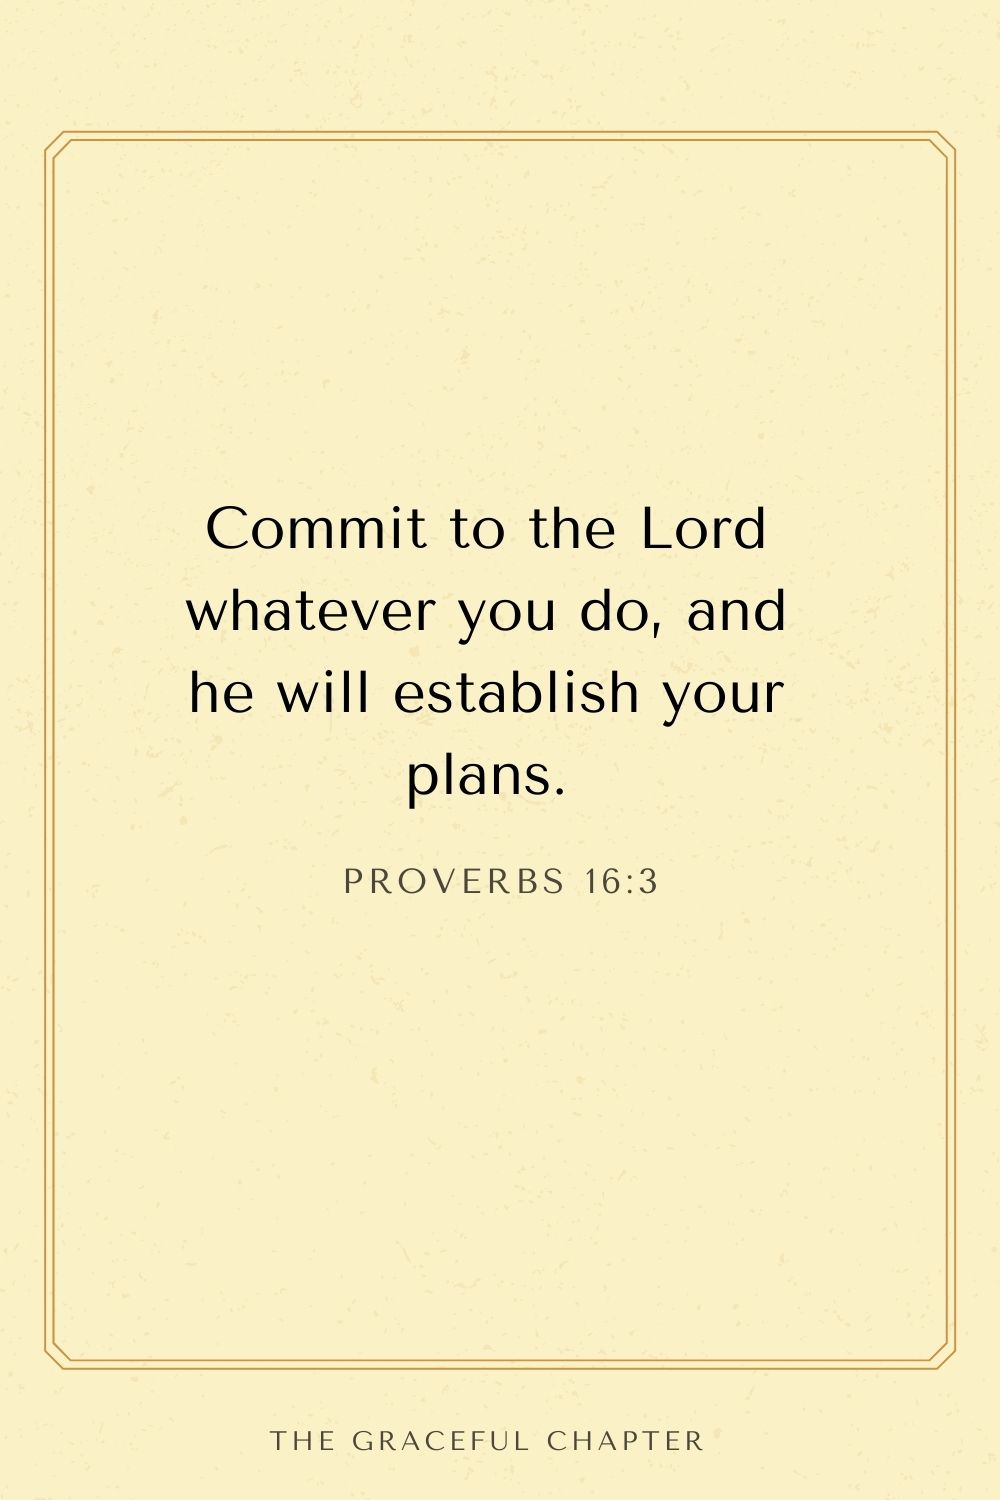 Commit to the Lord whatever you do, and he will establish your plans. Proverbs 16:3